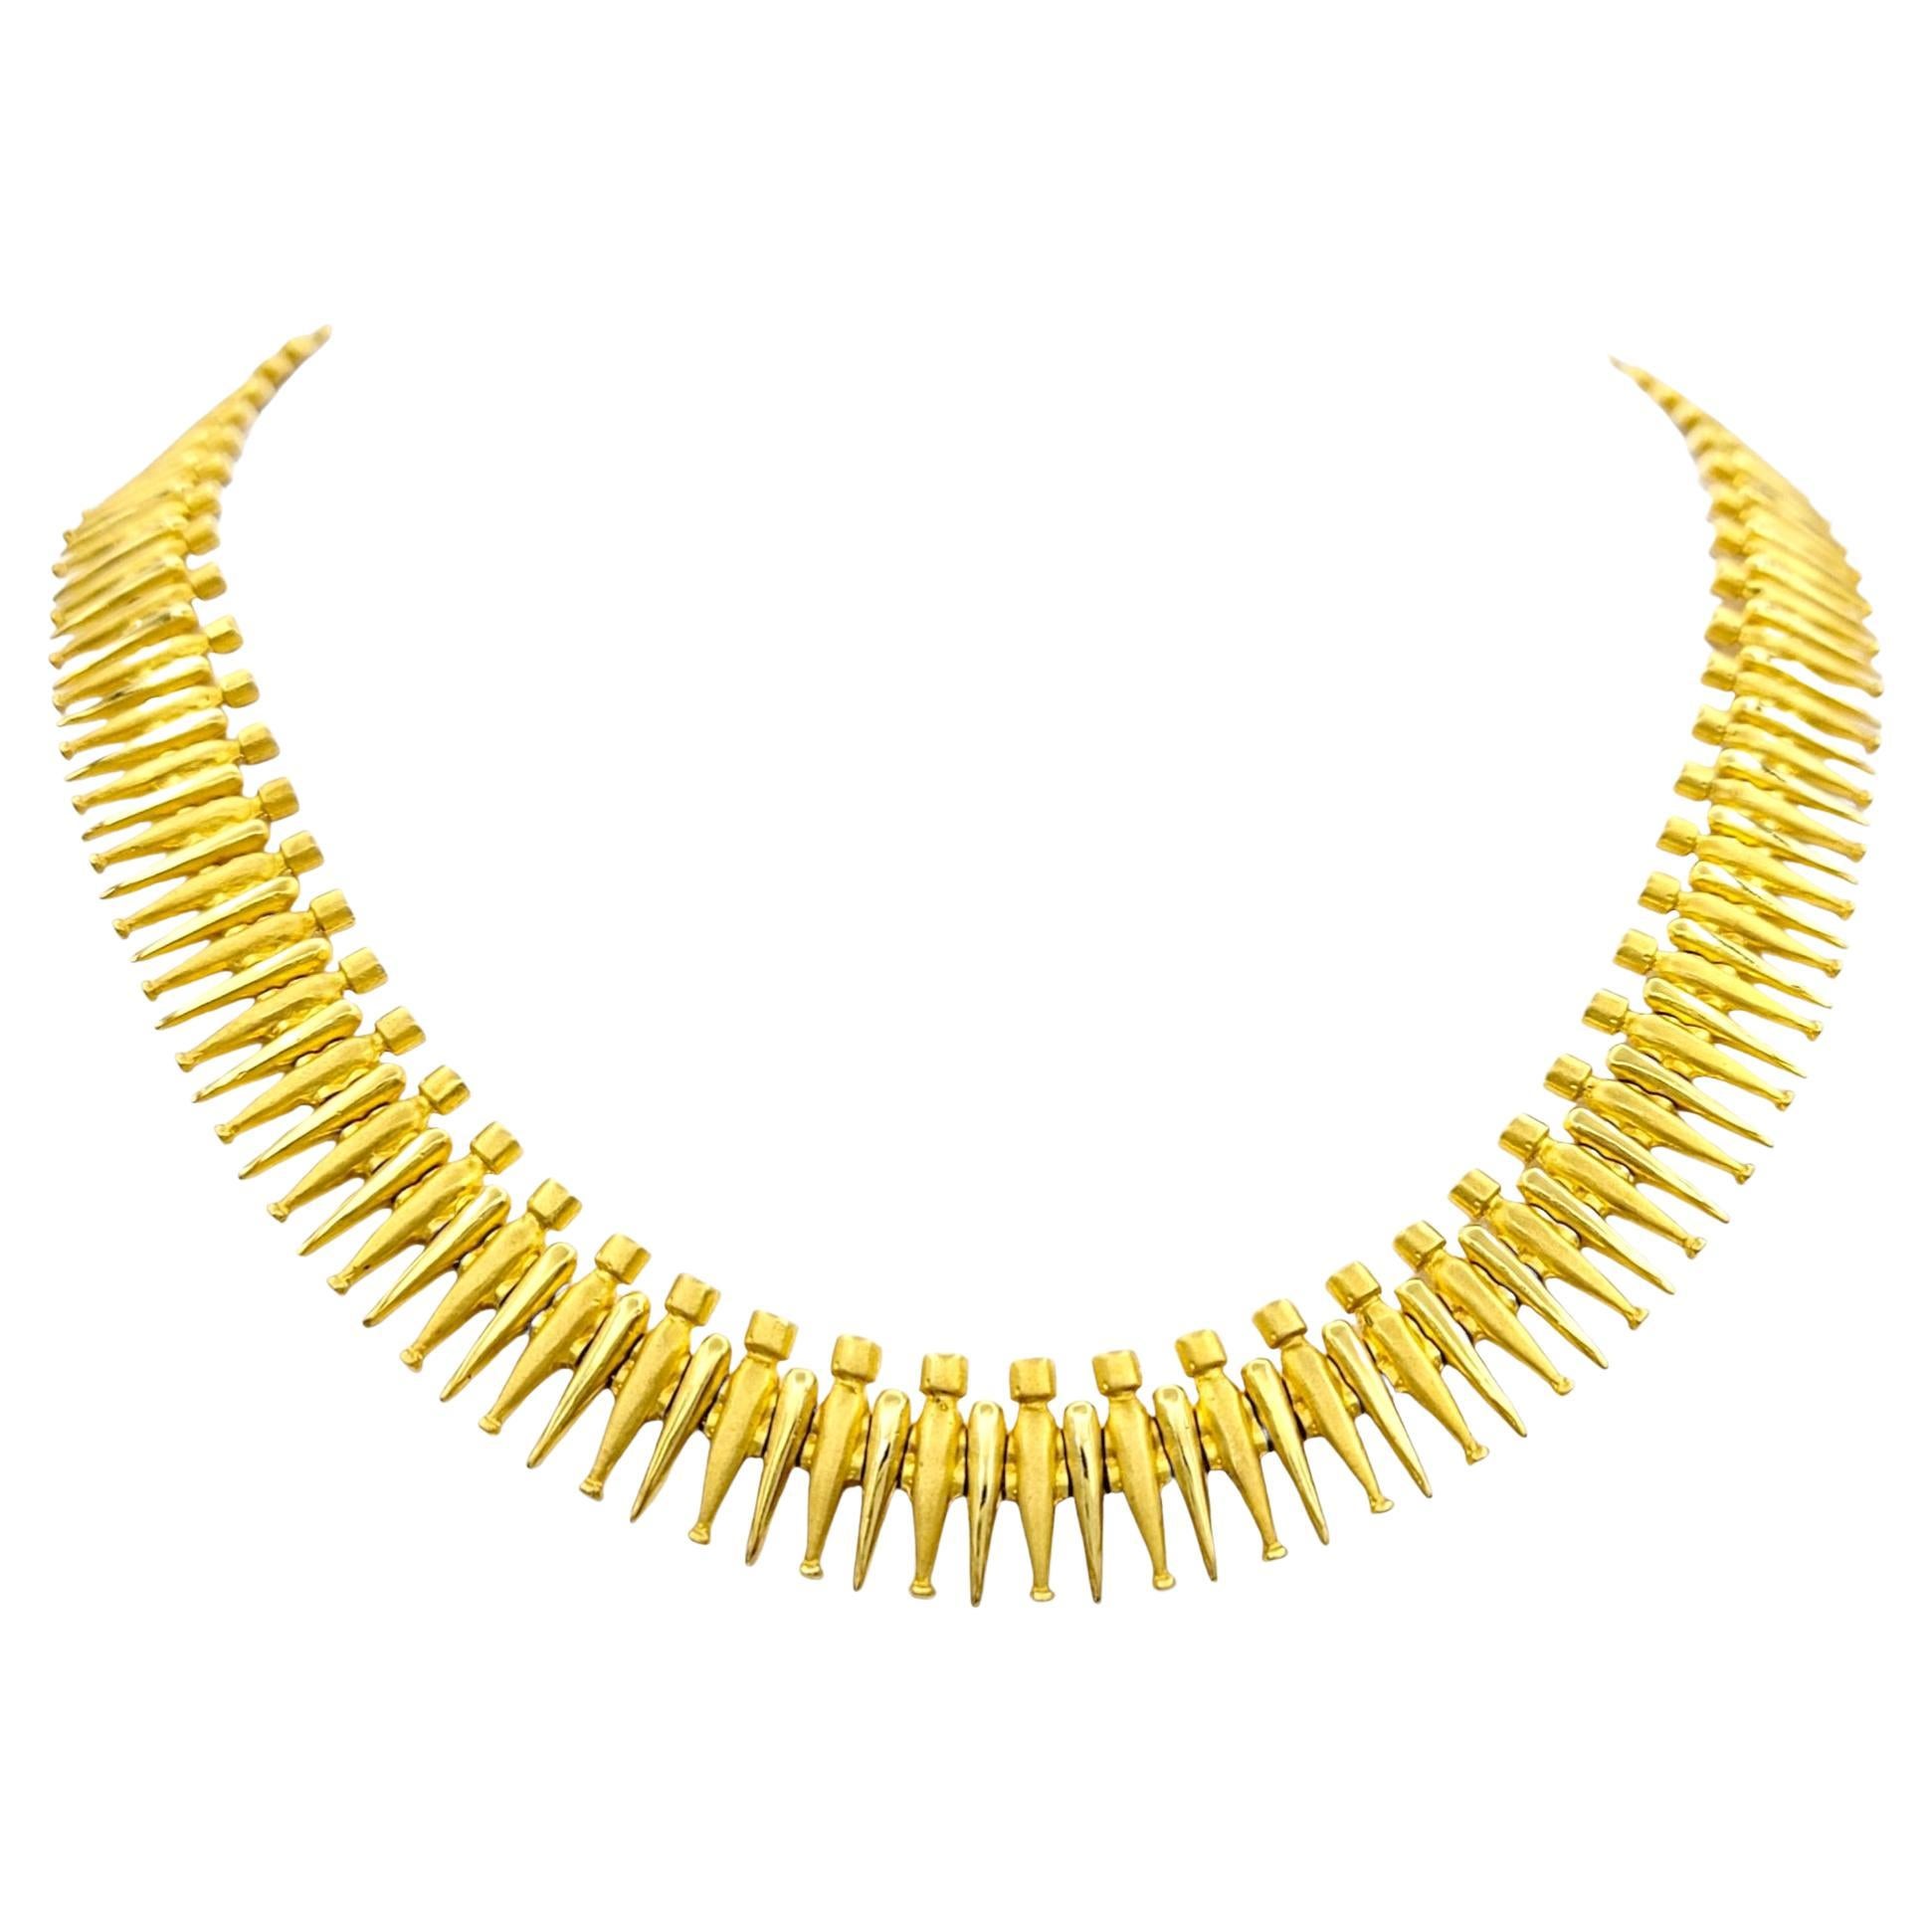 Handmade Spiked Heavy Collar Statement Necklace Set in 18 Karat Yellow Gold For Sale